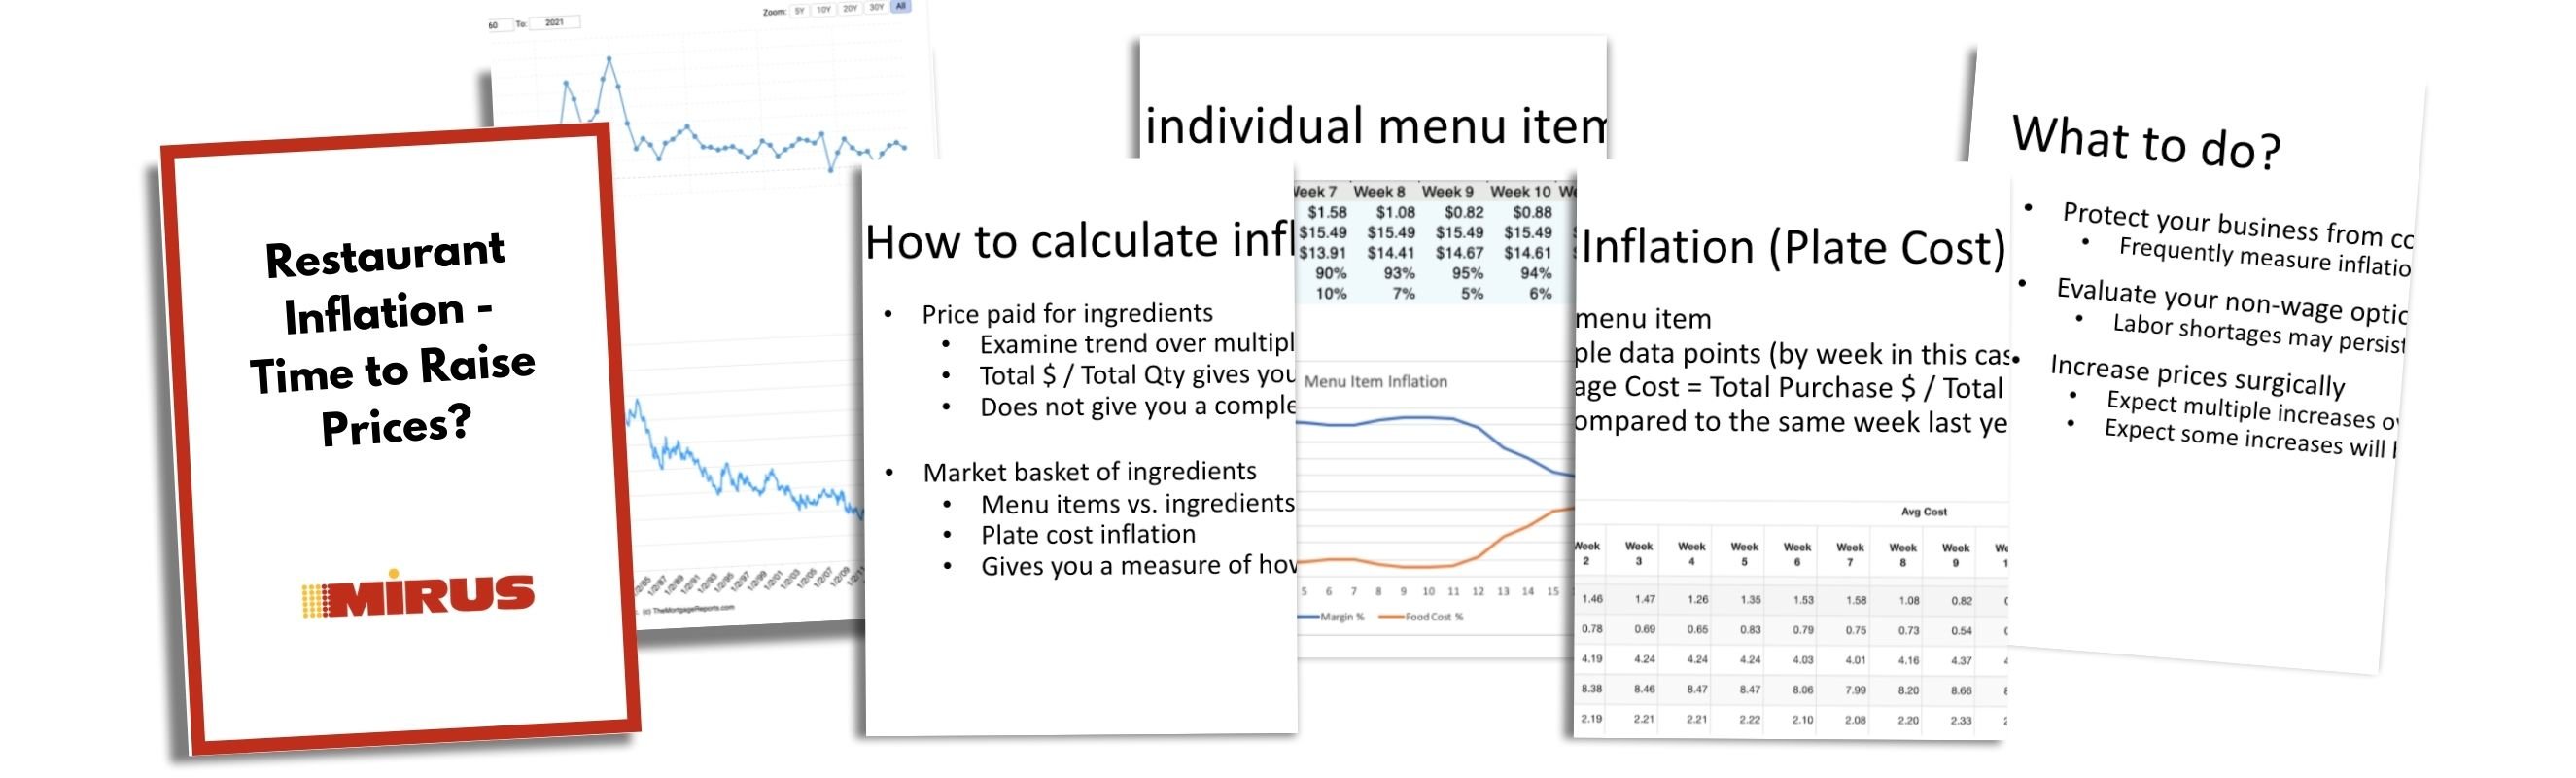 Restaurant Inflation- Time to Raise Prices Presentation by Mirus